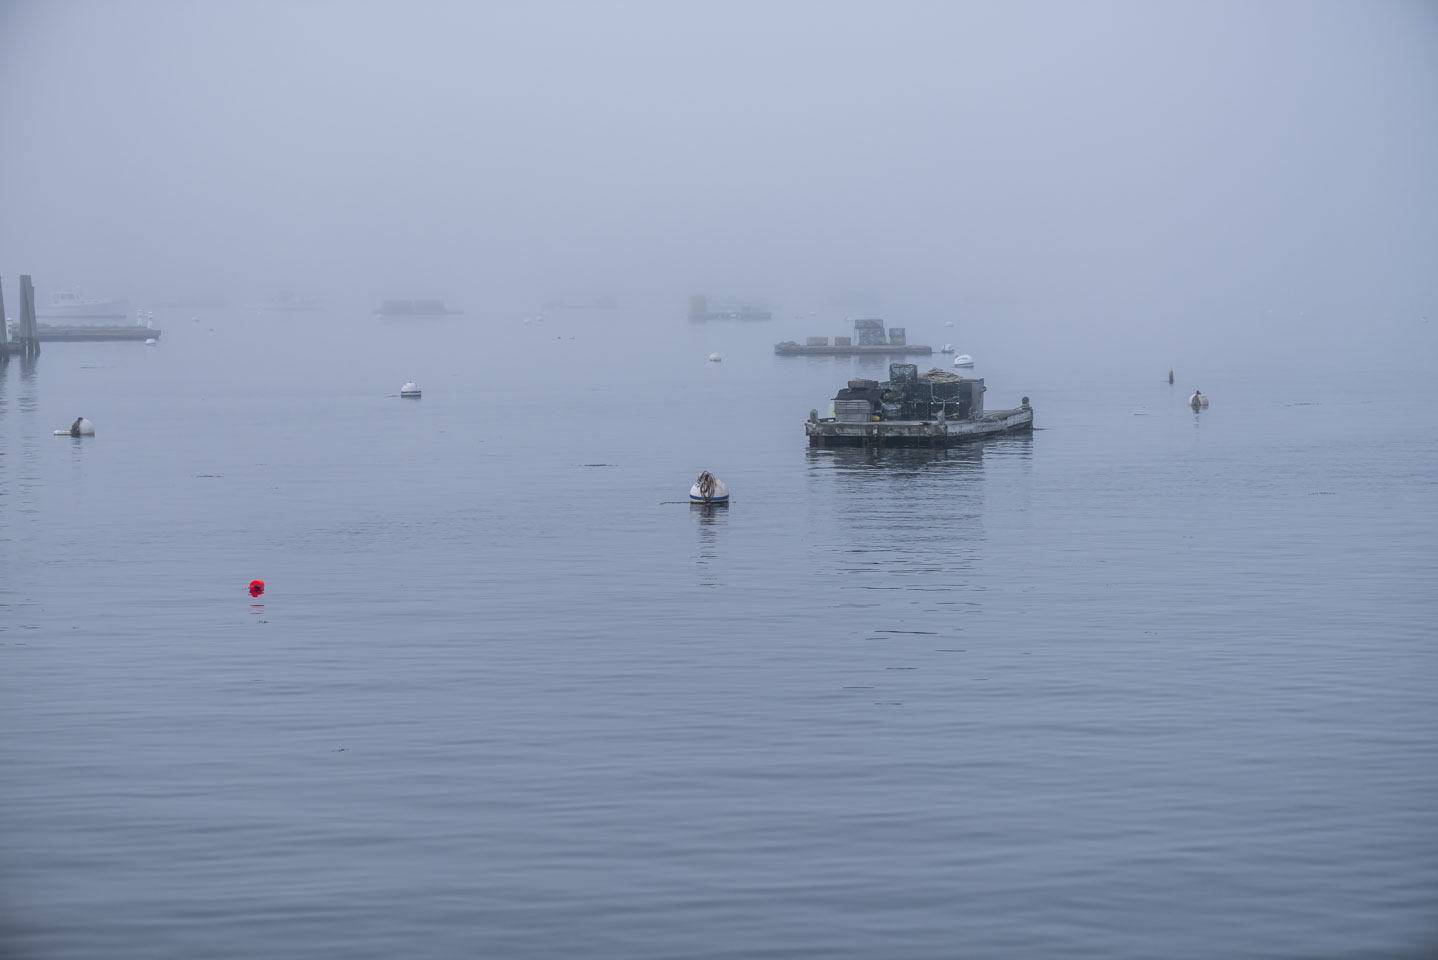 Rafts with lobster traps on the water in the fog